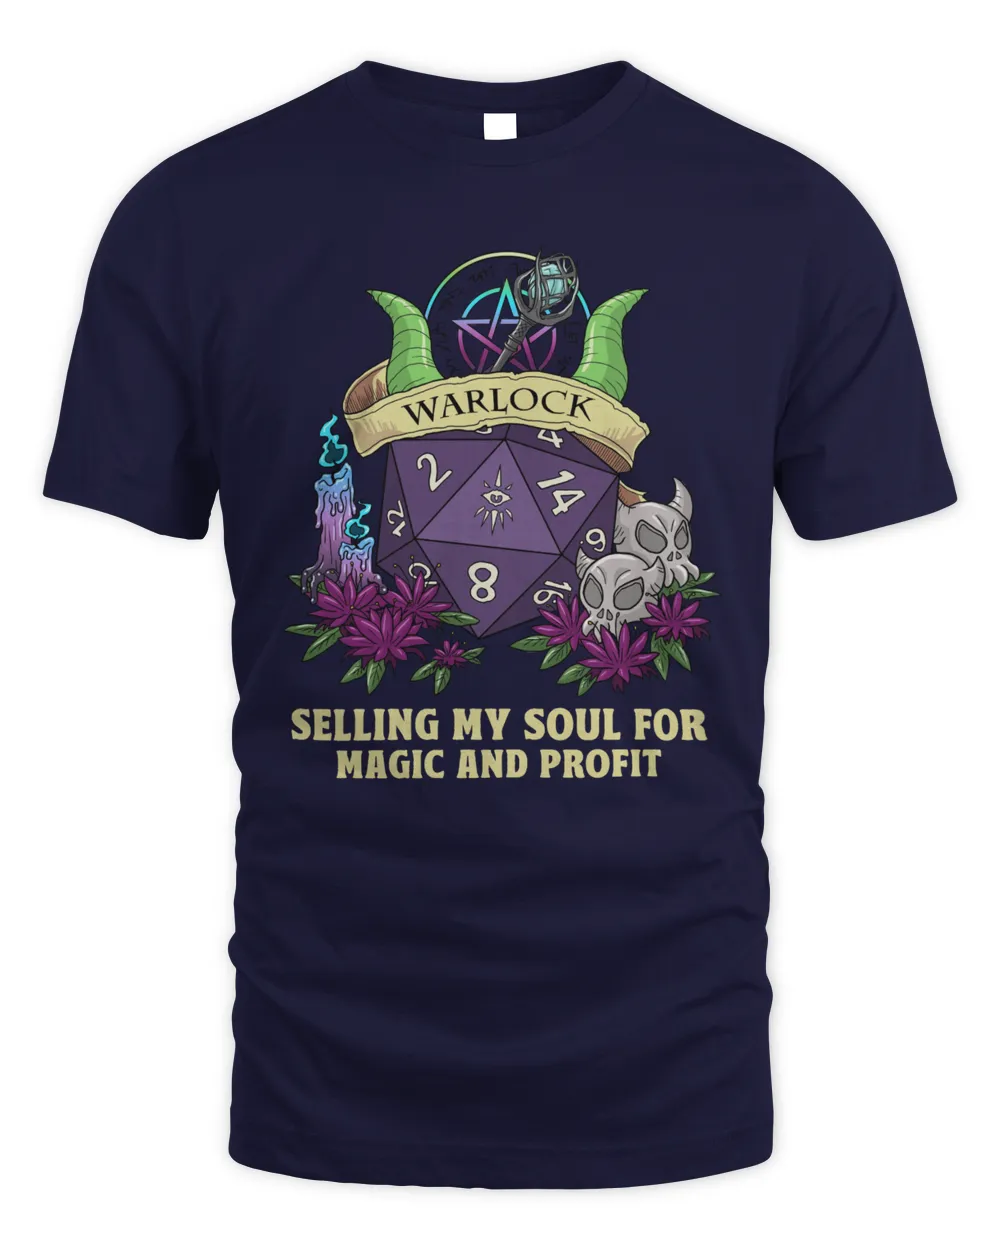 Warlock Selling My Soul For Magic And Profit, Dungeons and Dragons, DnD, RPG Gift, Dungeon Master Shirt Unisex Standard T-Shirt navy 